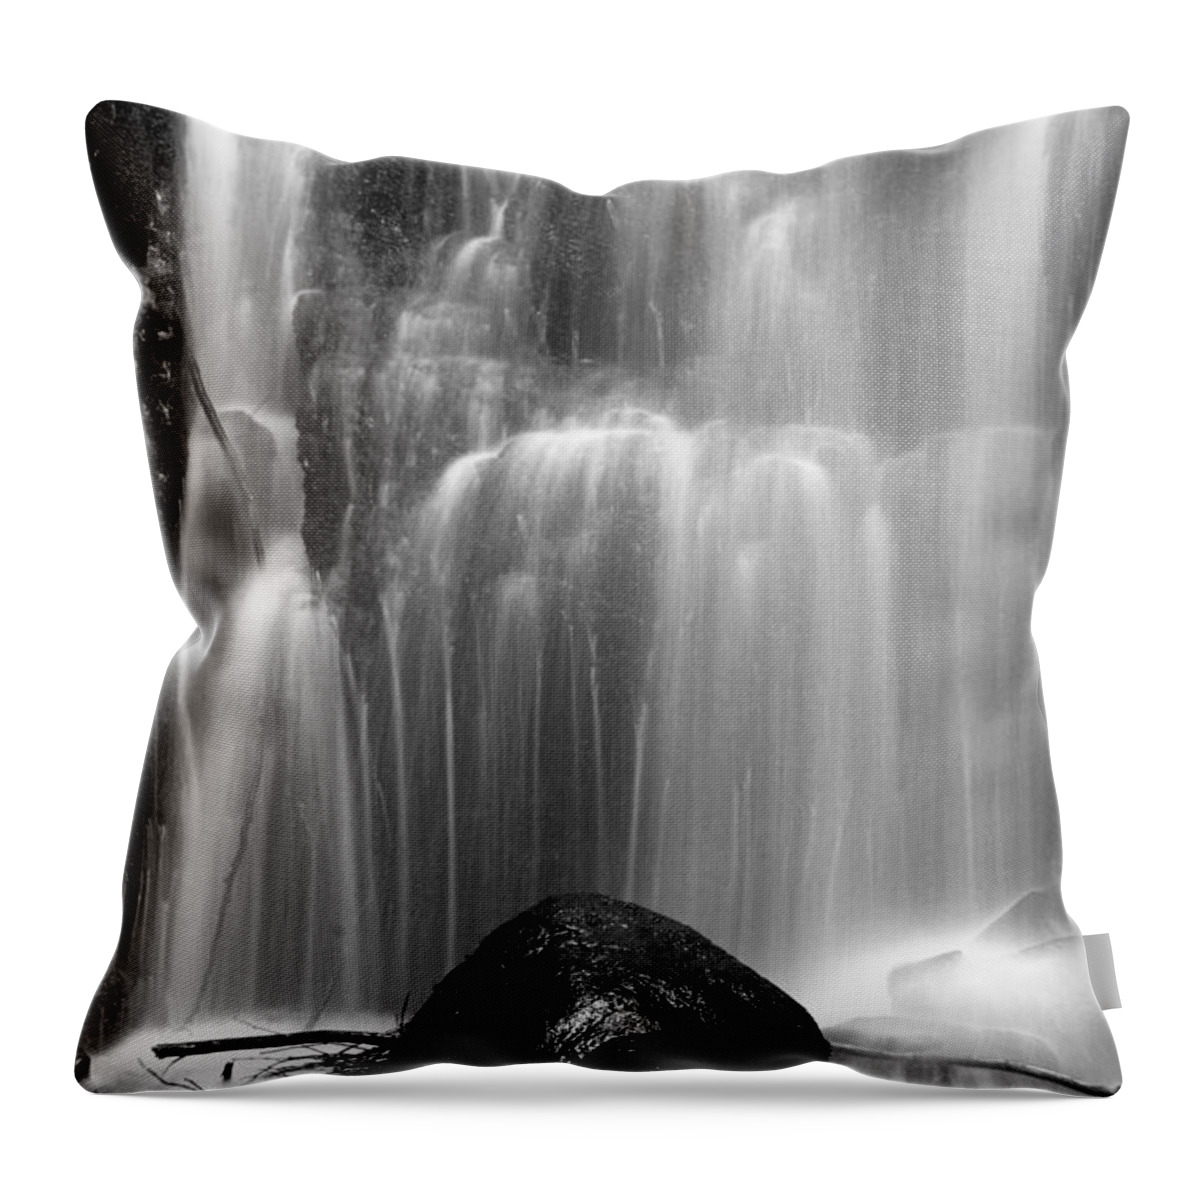 Waterfall Throw Pillow featuring the photograph The Nugget by Anthony Davey